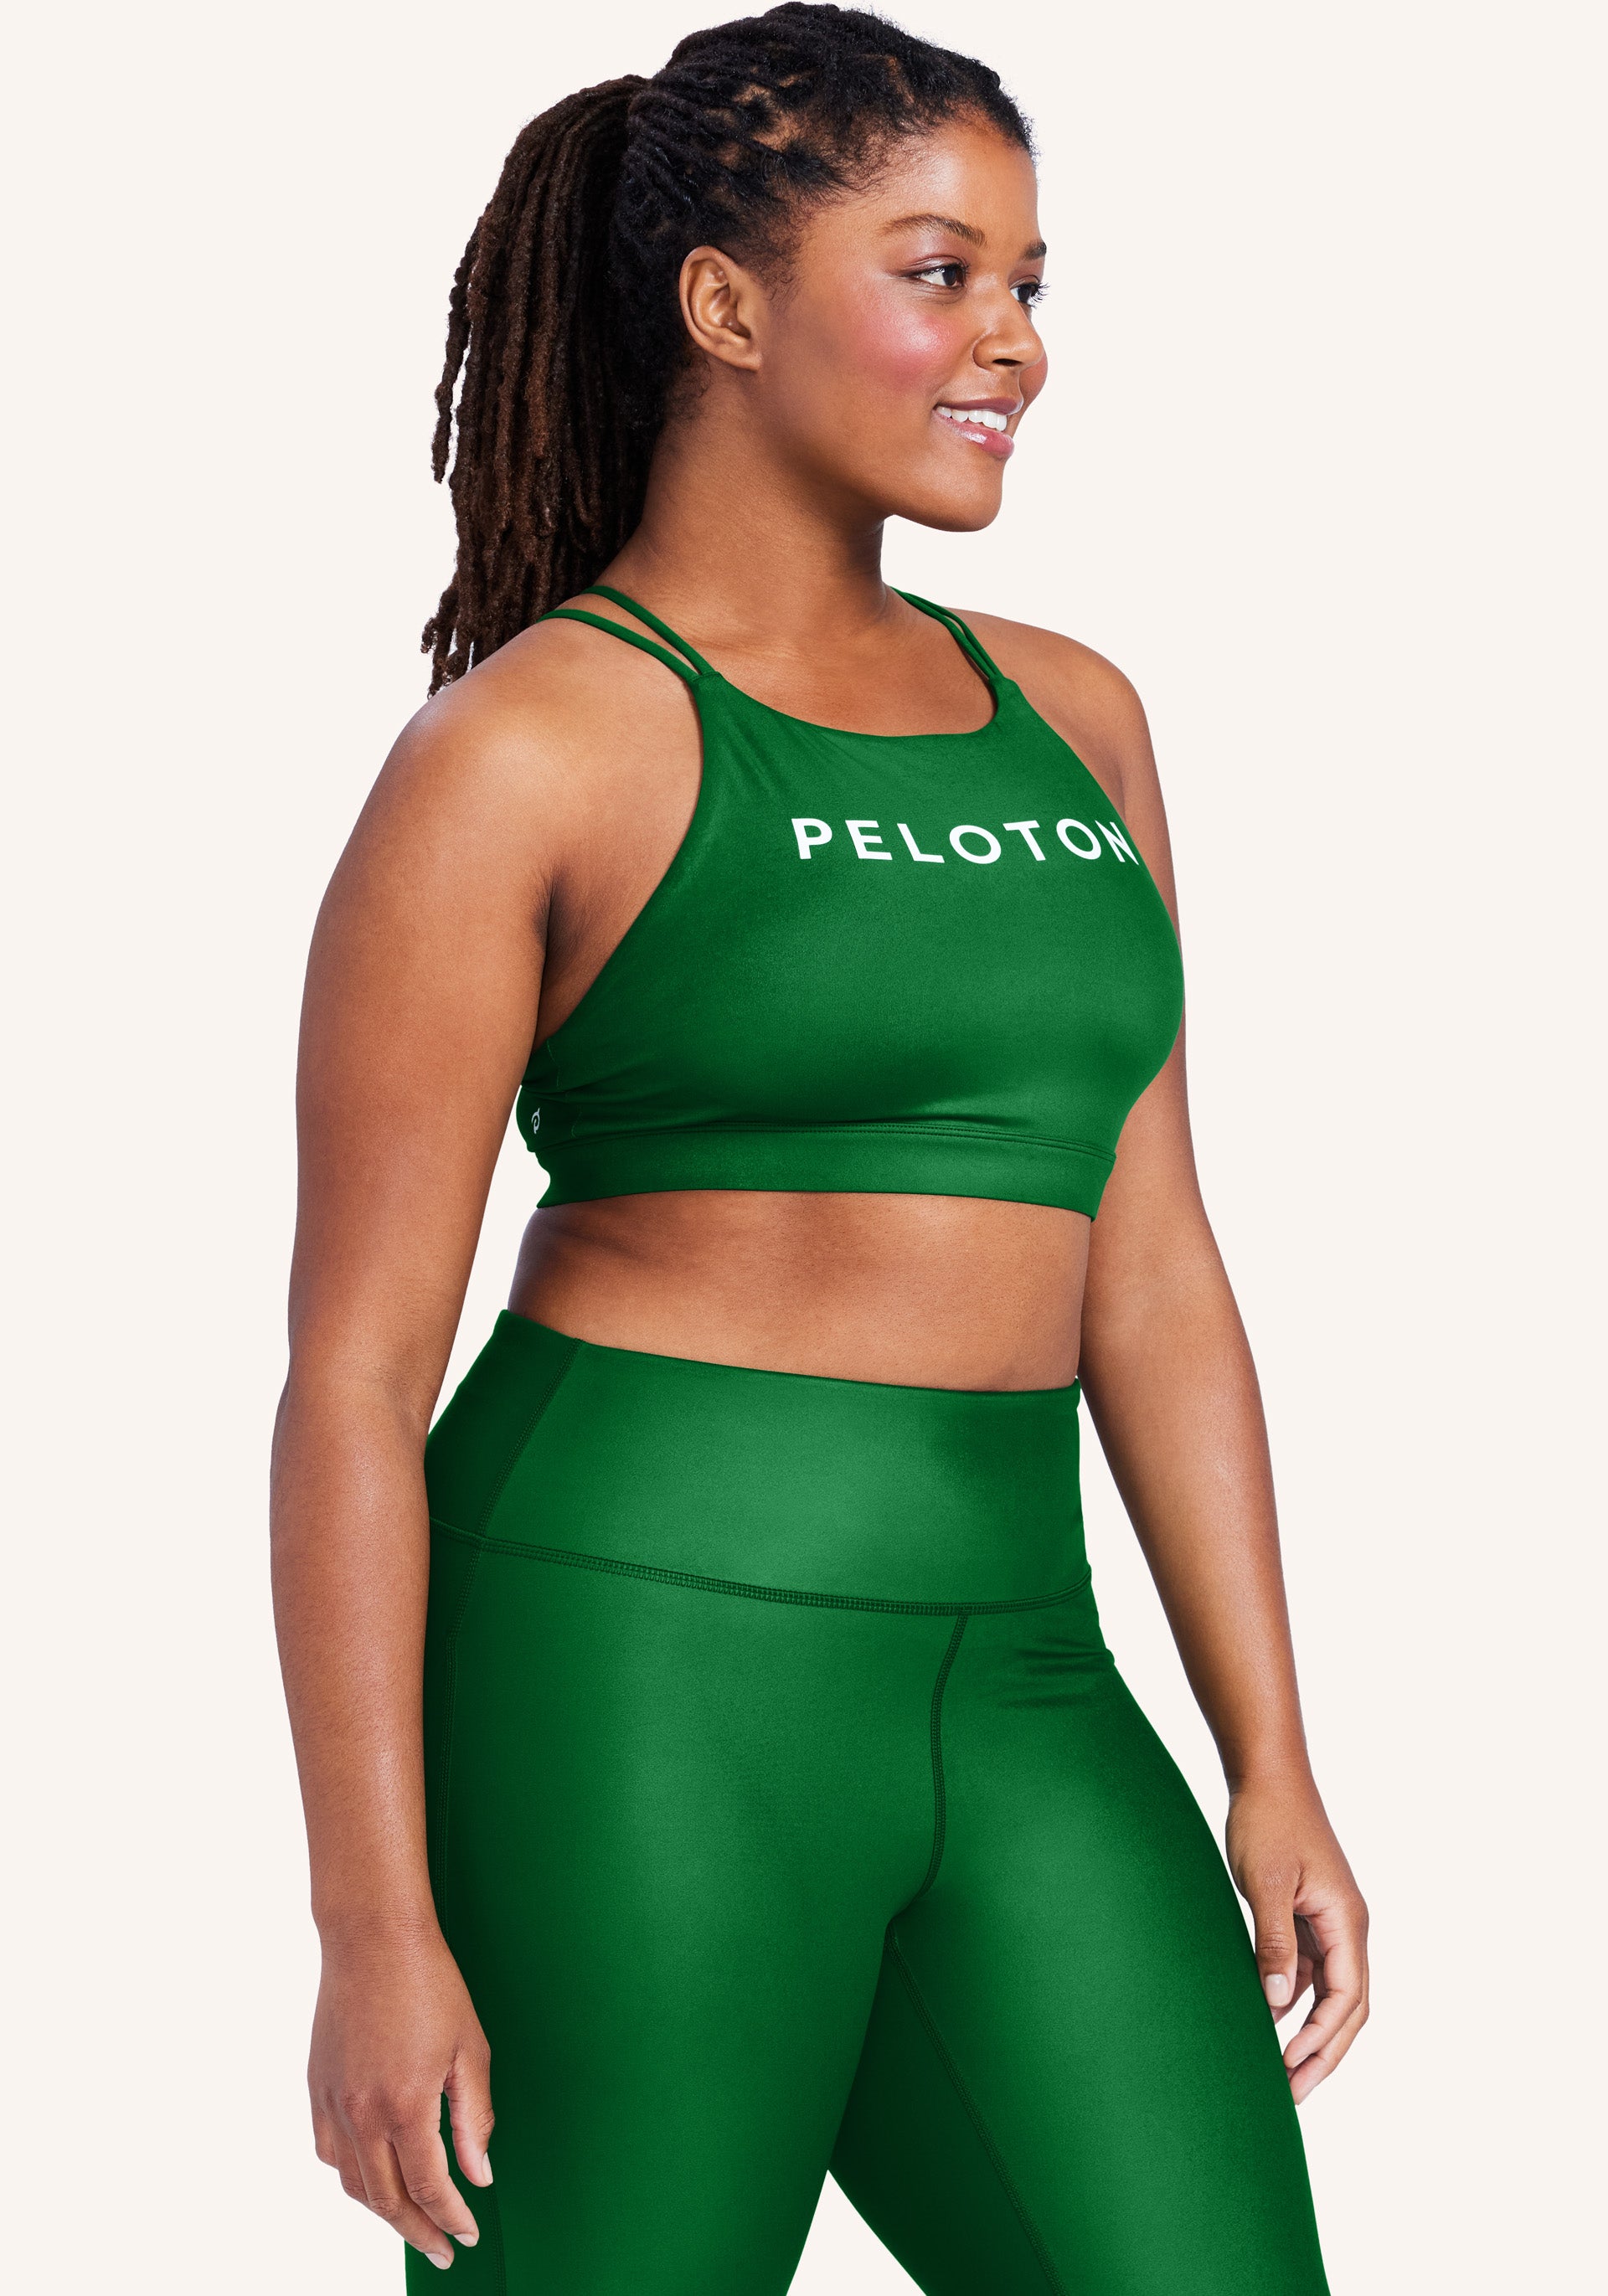 Bellwether Women's Size Small Green & Black Built in Bra Cycling Halter Top  